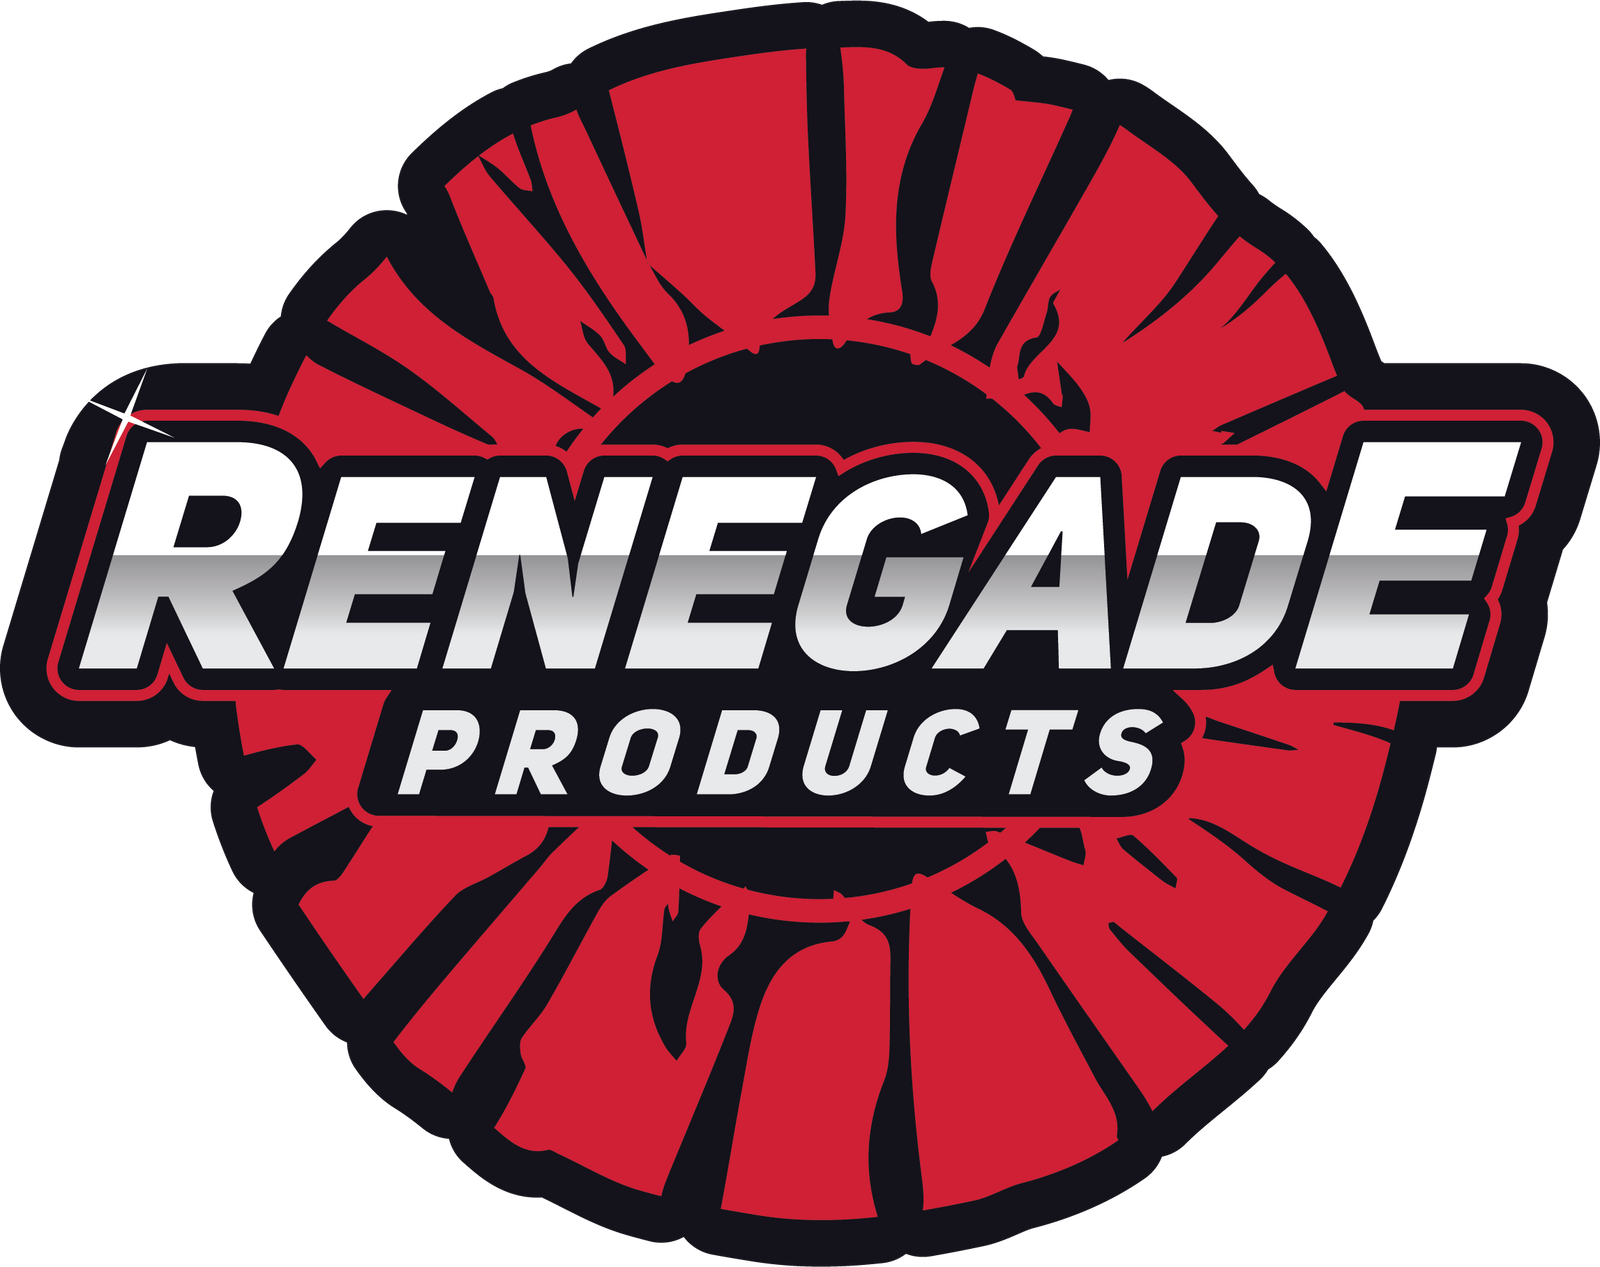 Renegade Products logo